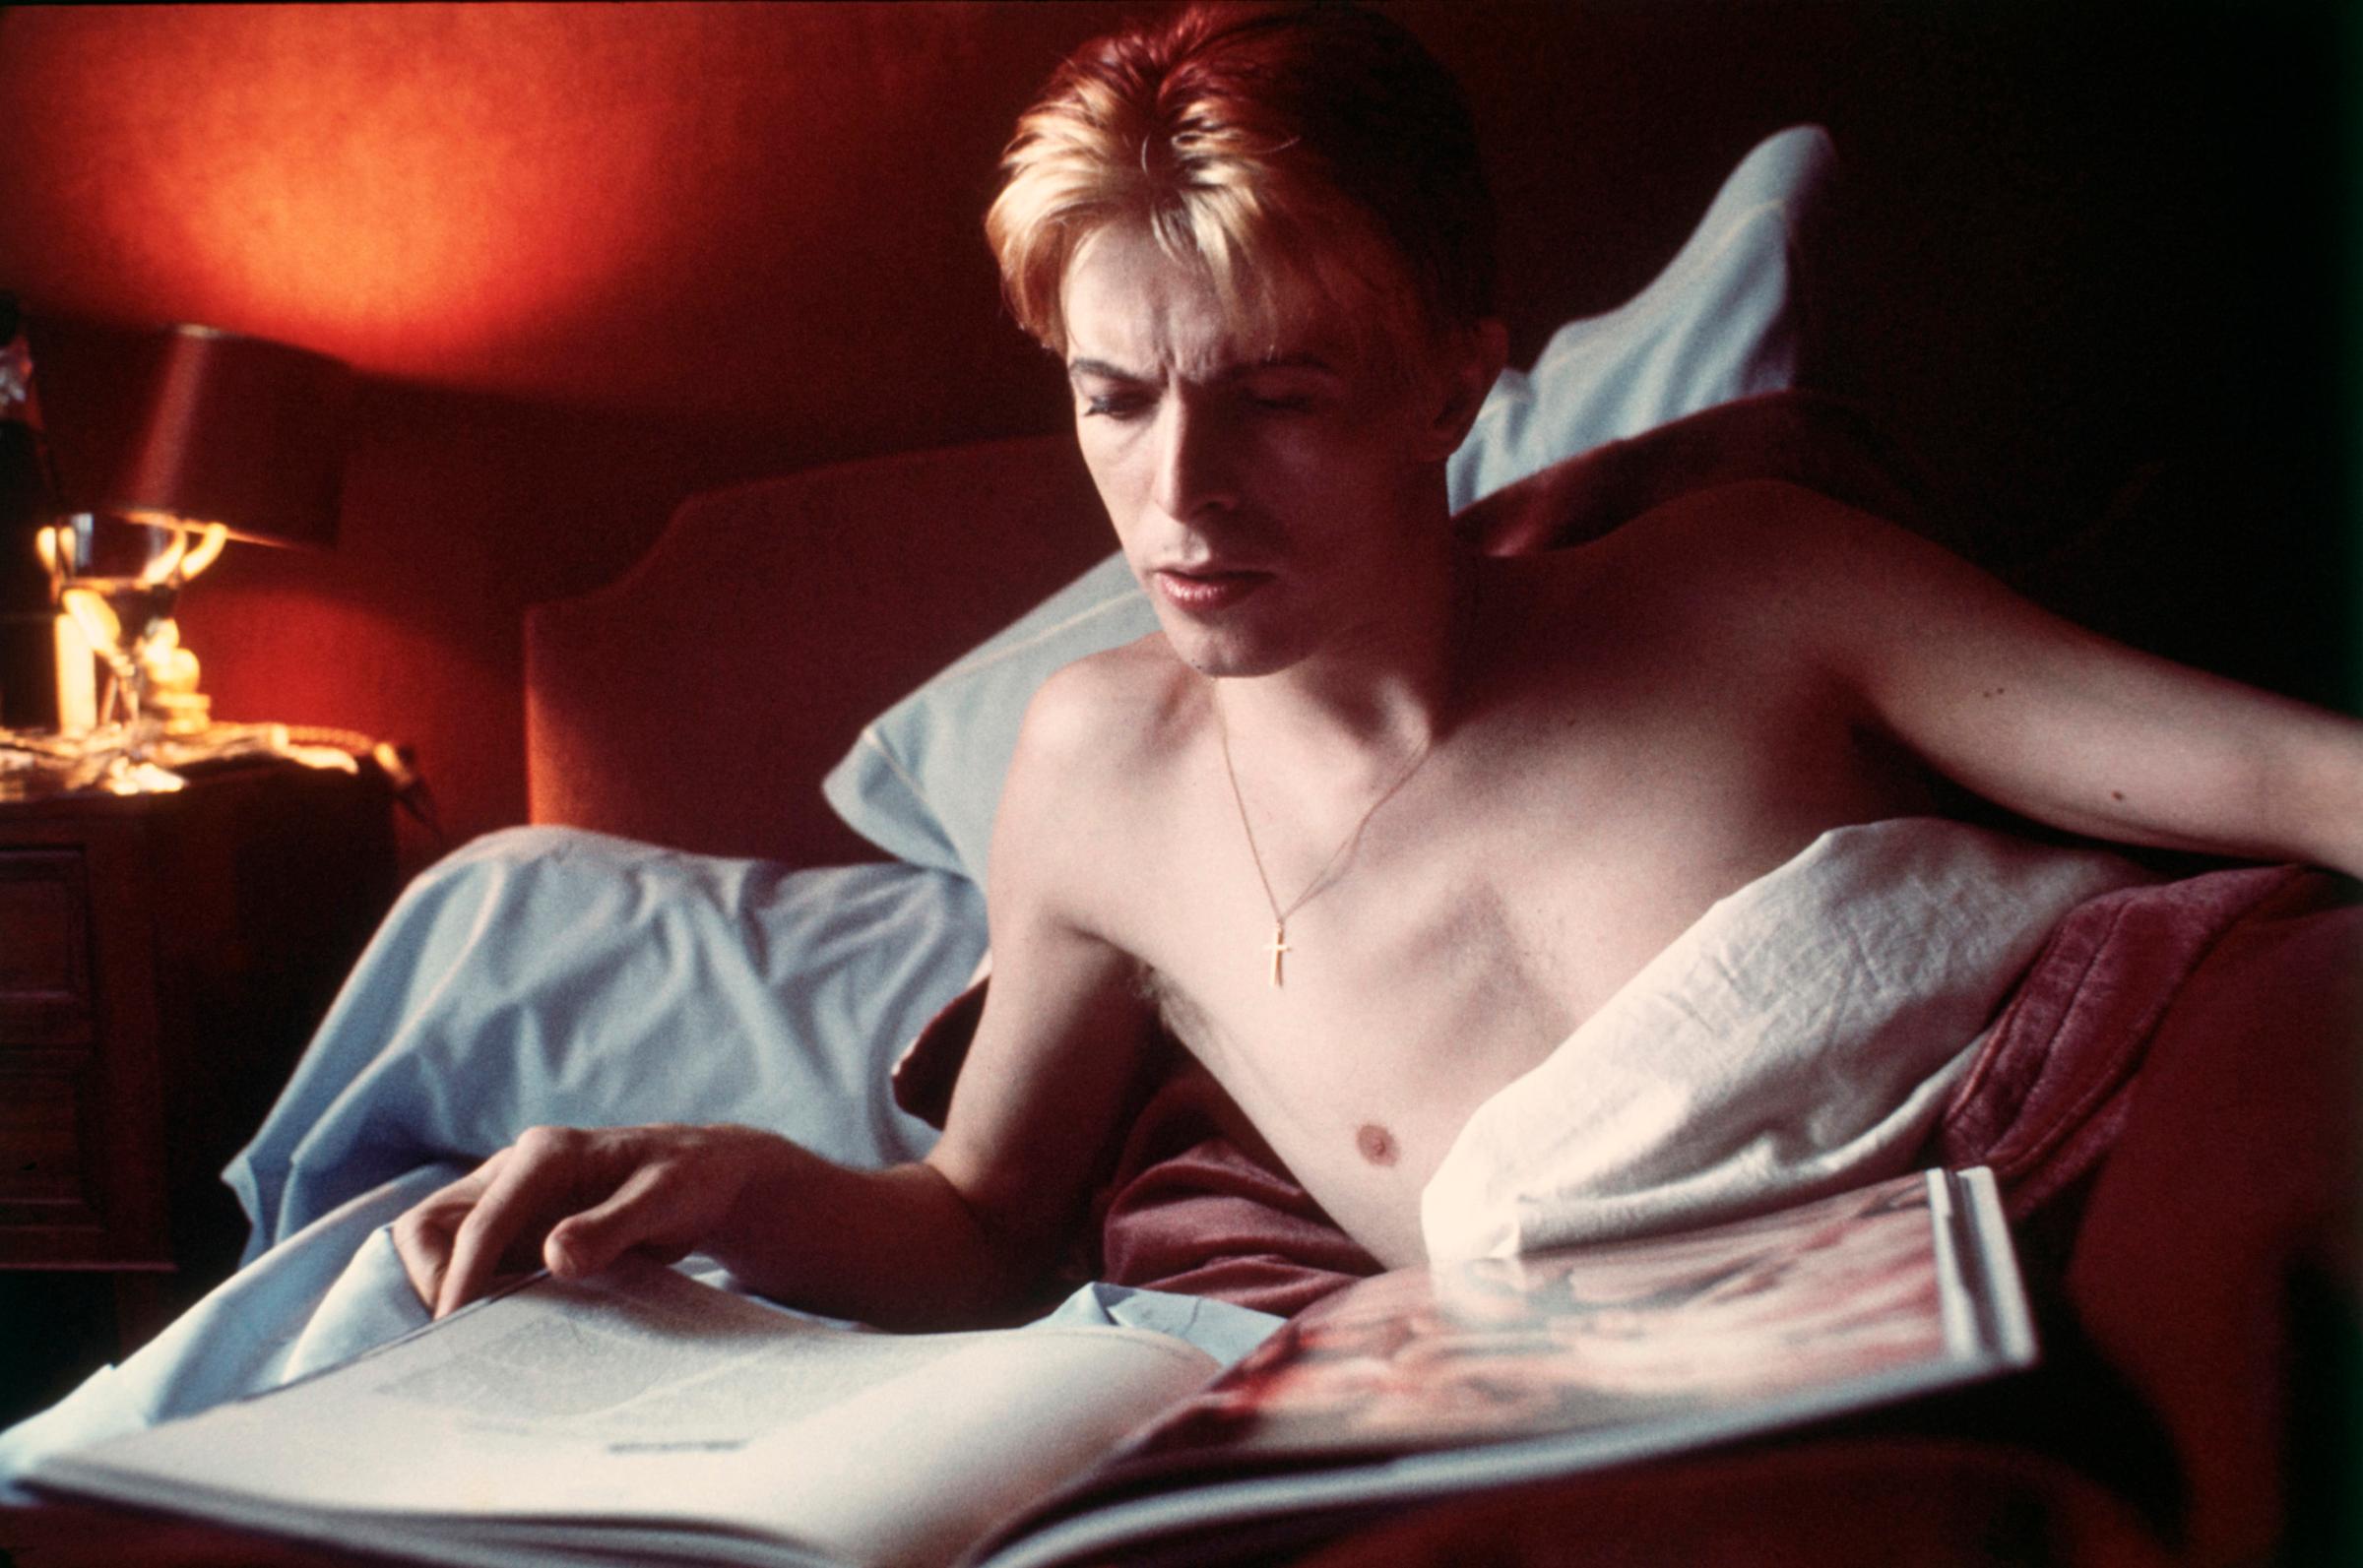 Bowie reading in bed at L'Hotel in Paris, France, 1976.